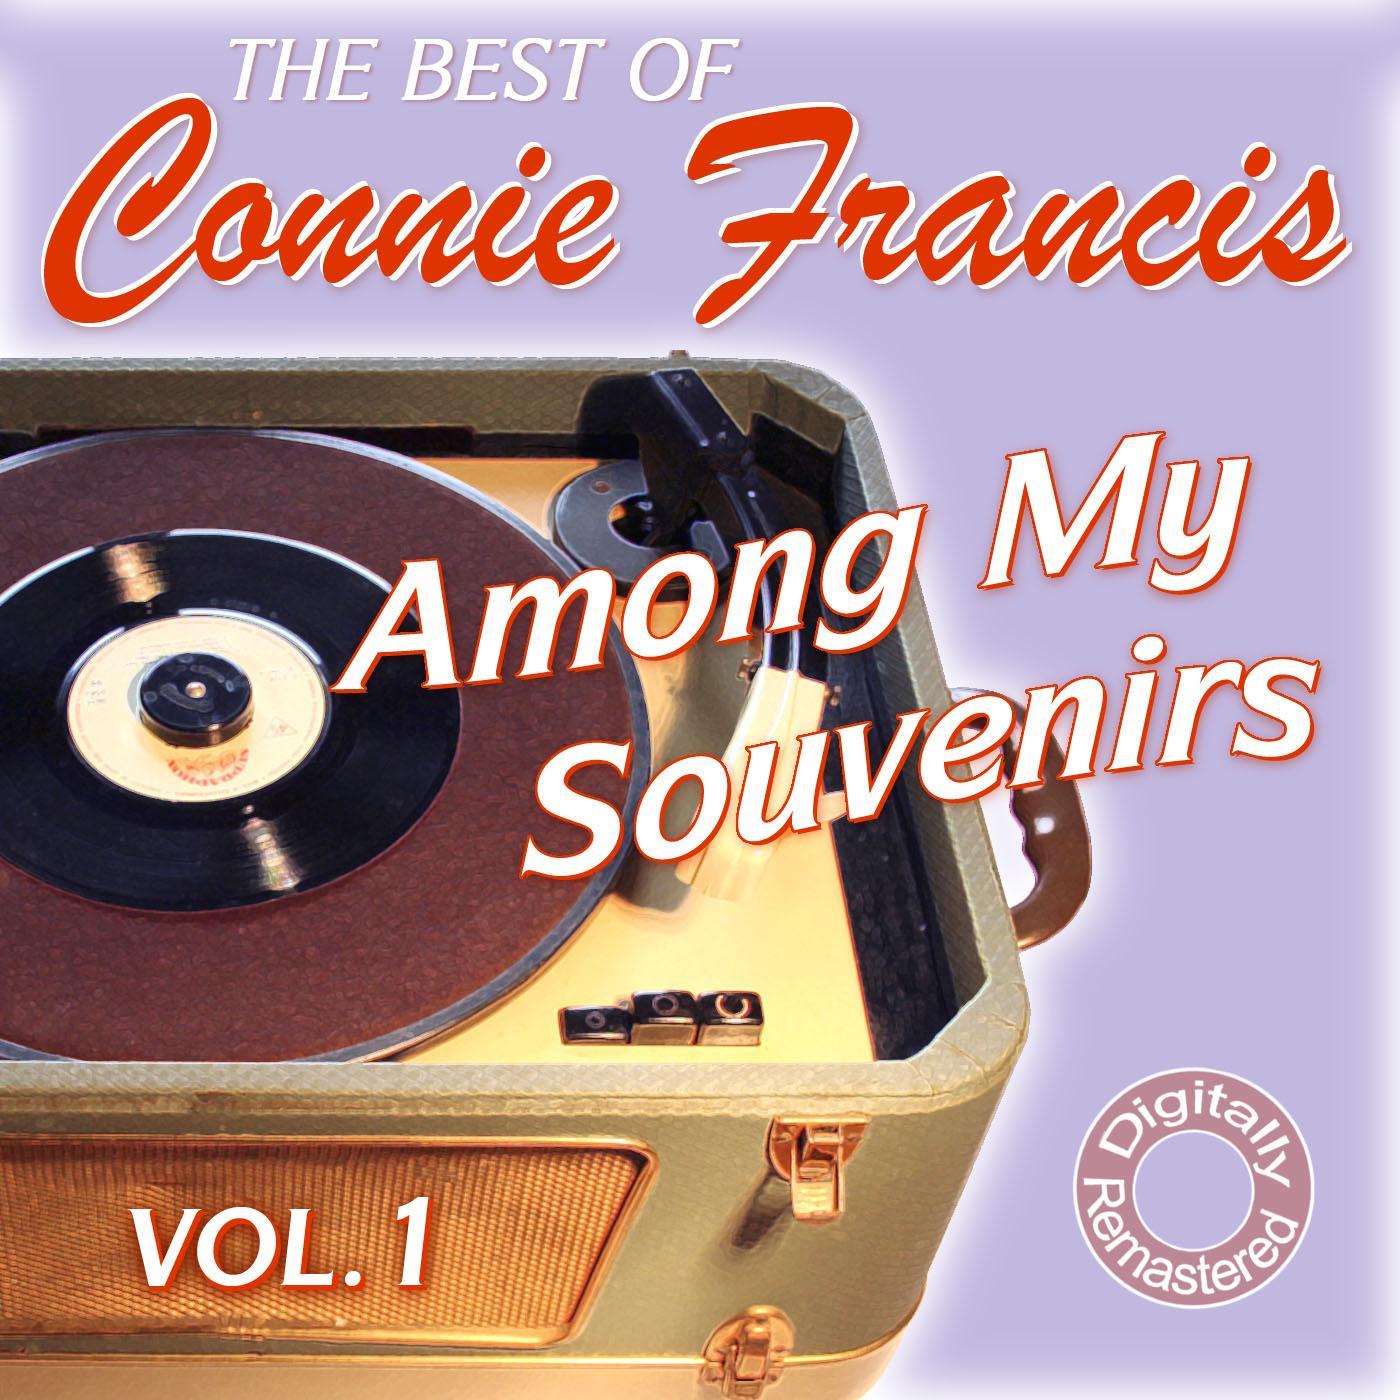 Among My Souvenirs -  The Best Of Vol. 1